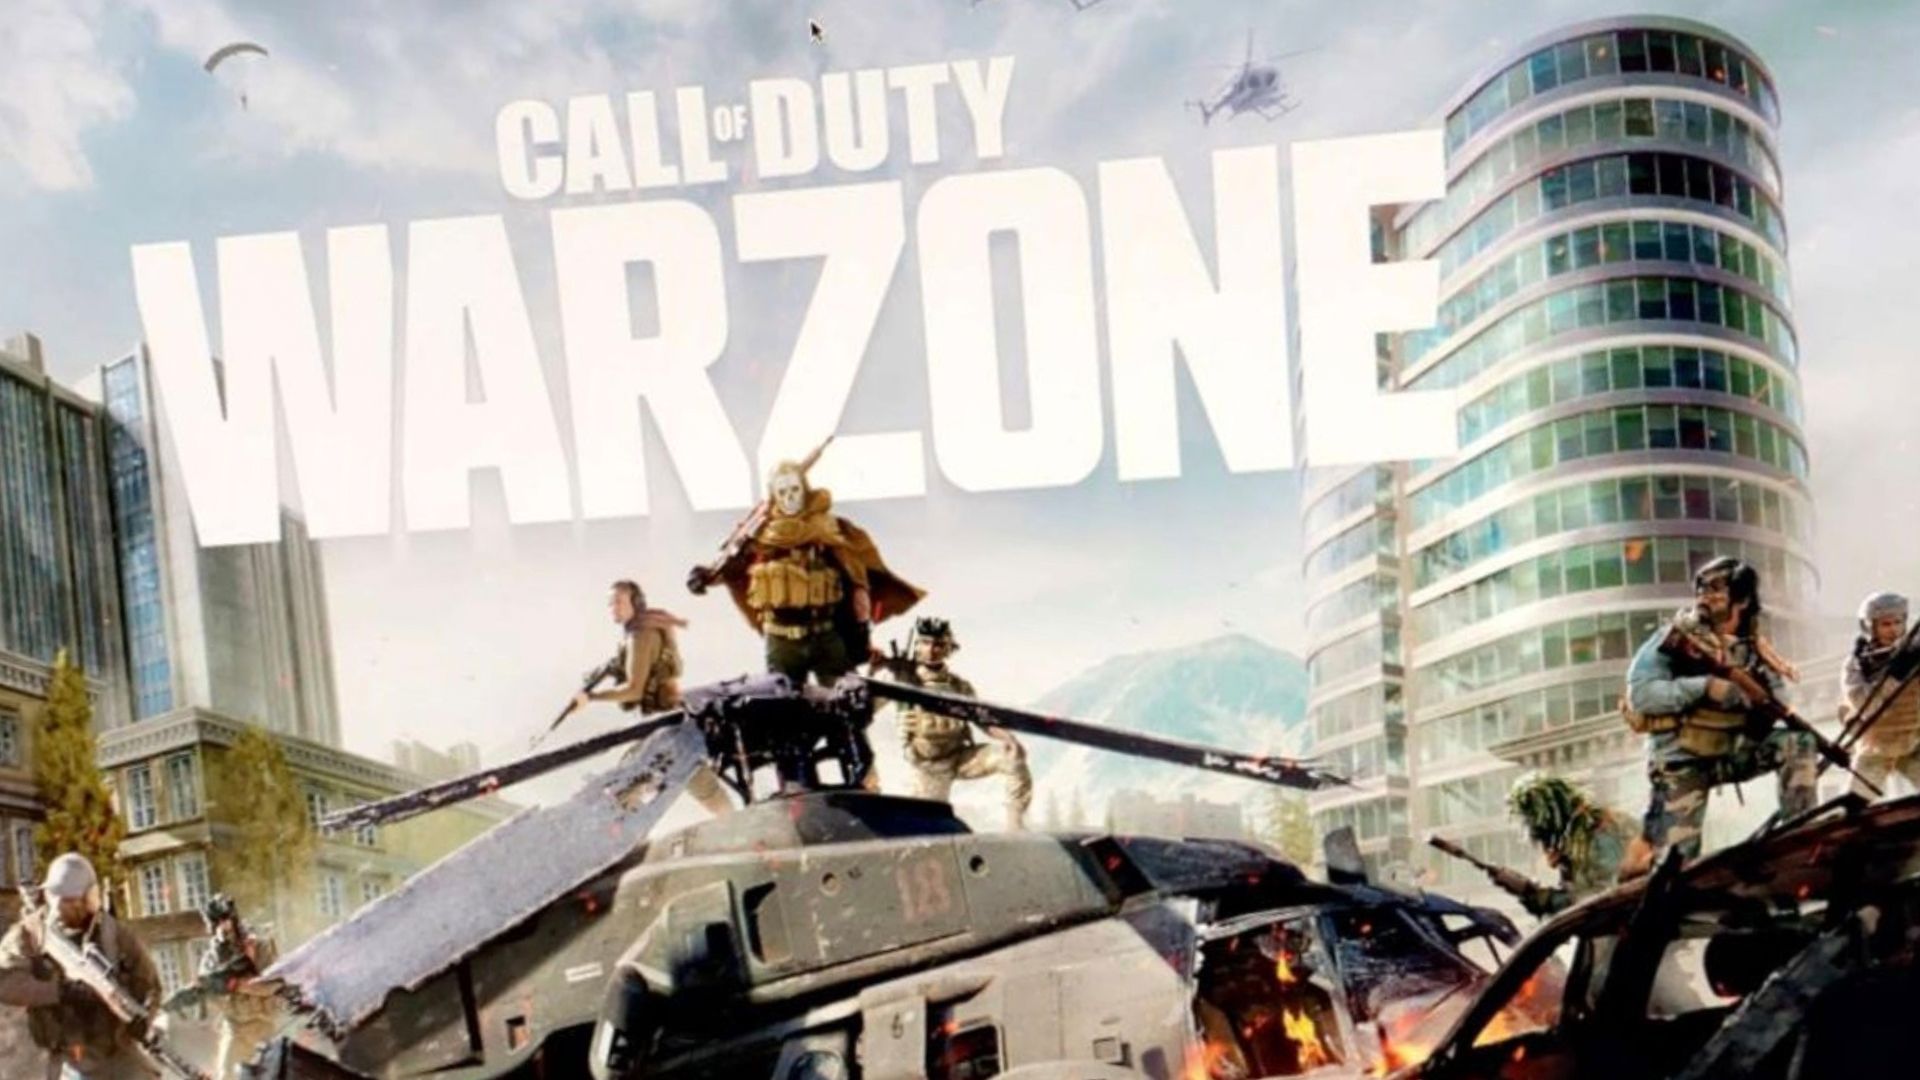 Call of Duty: Warzone image leaks, Activision issues copyright takedowns